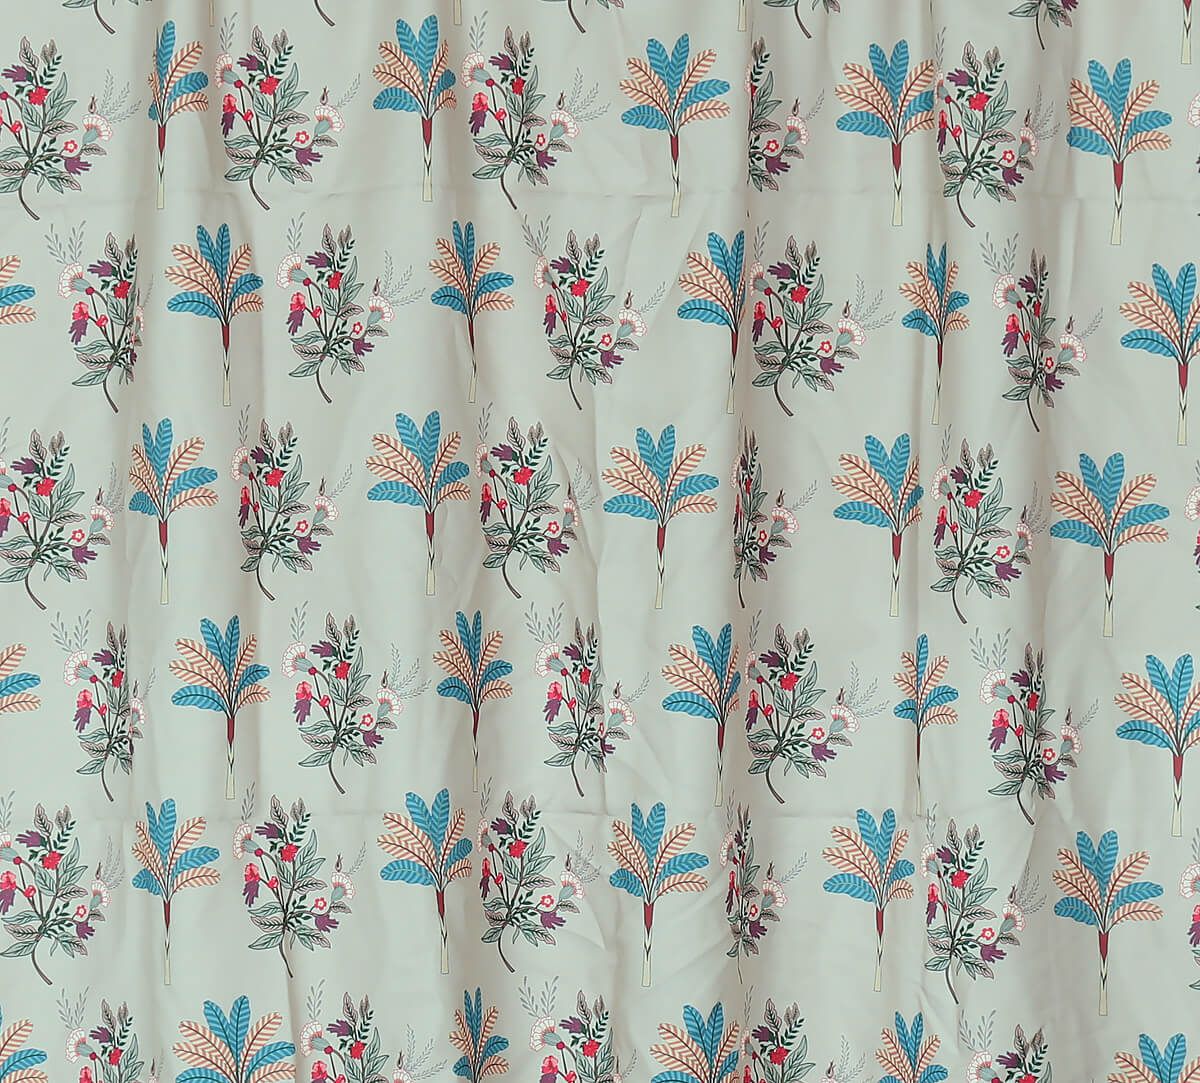 India Circus by Krsnaa Mehta Beige Inflorescence Dreams Fabric